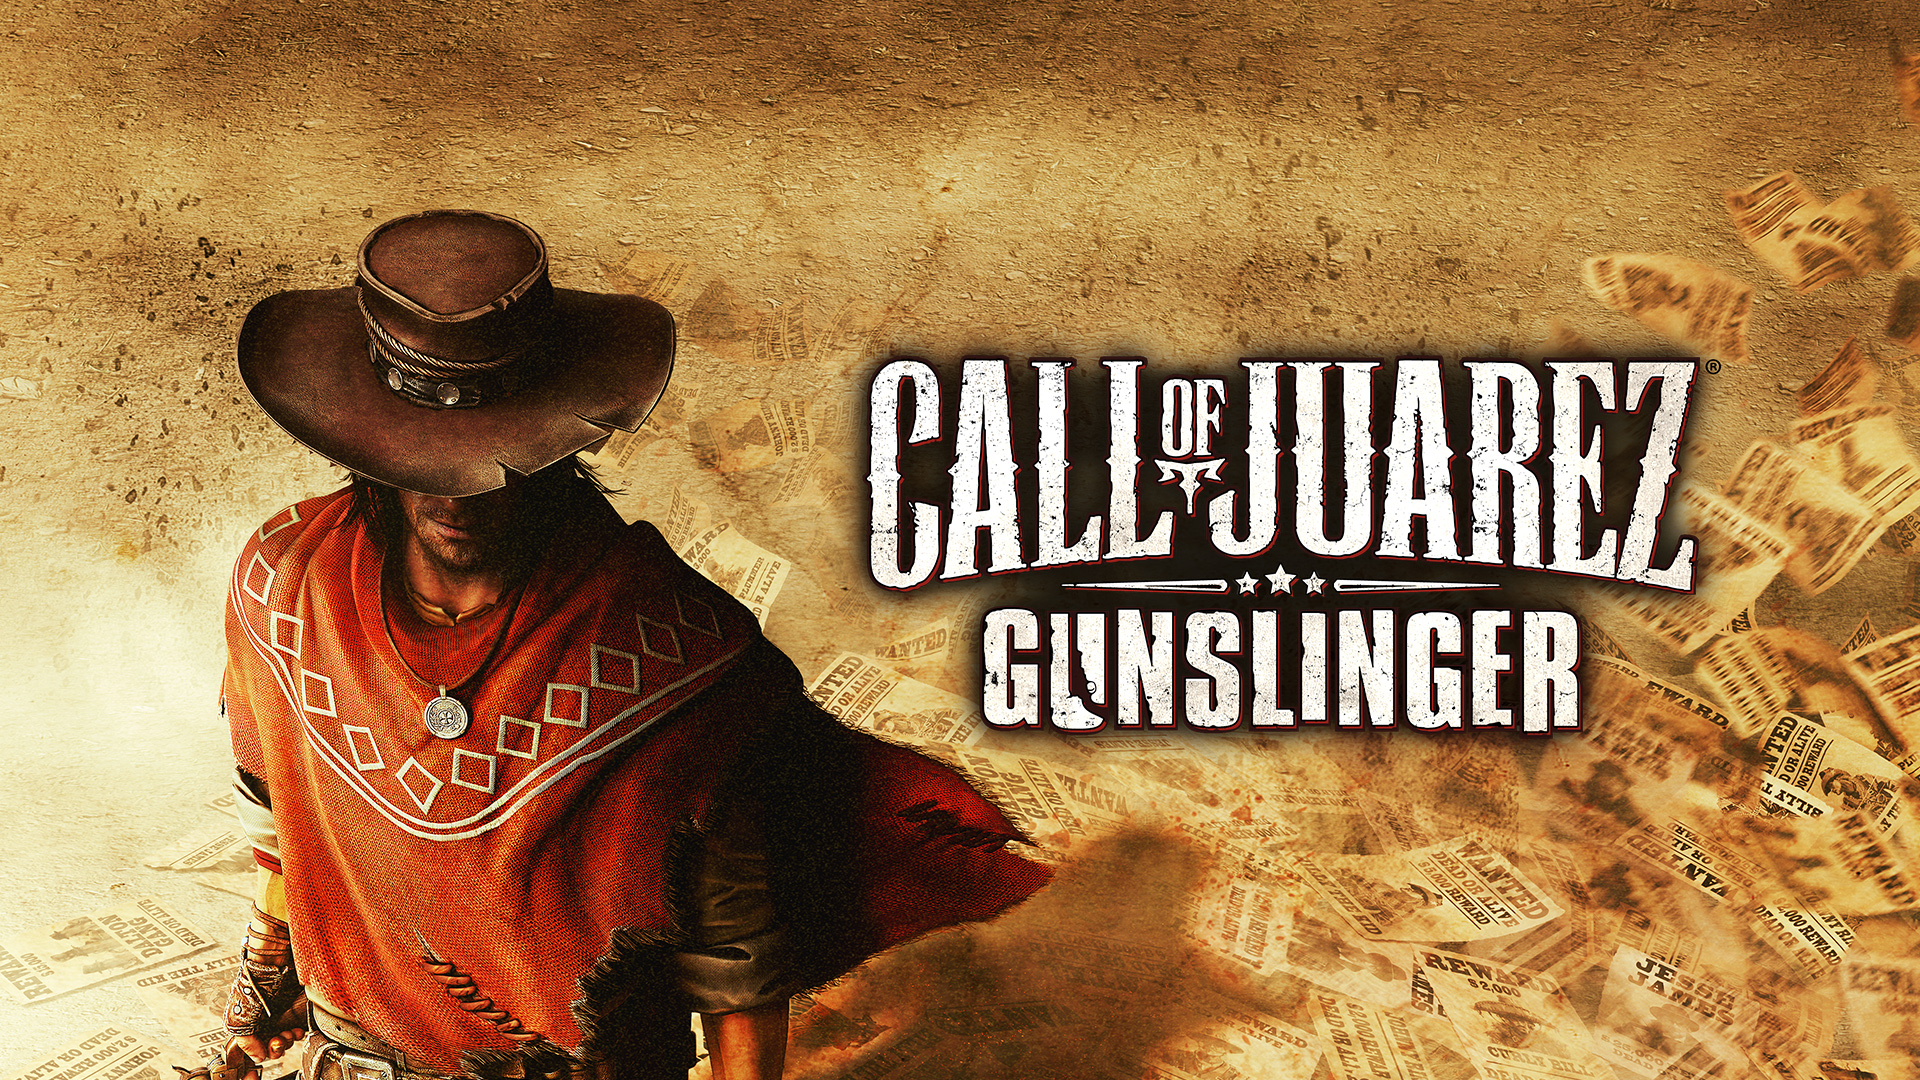 Call of juarez gunslinger steam is required in order фото 12